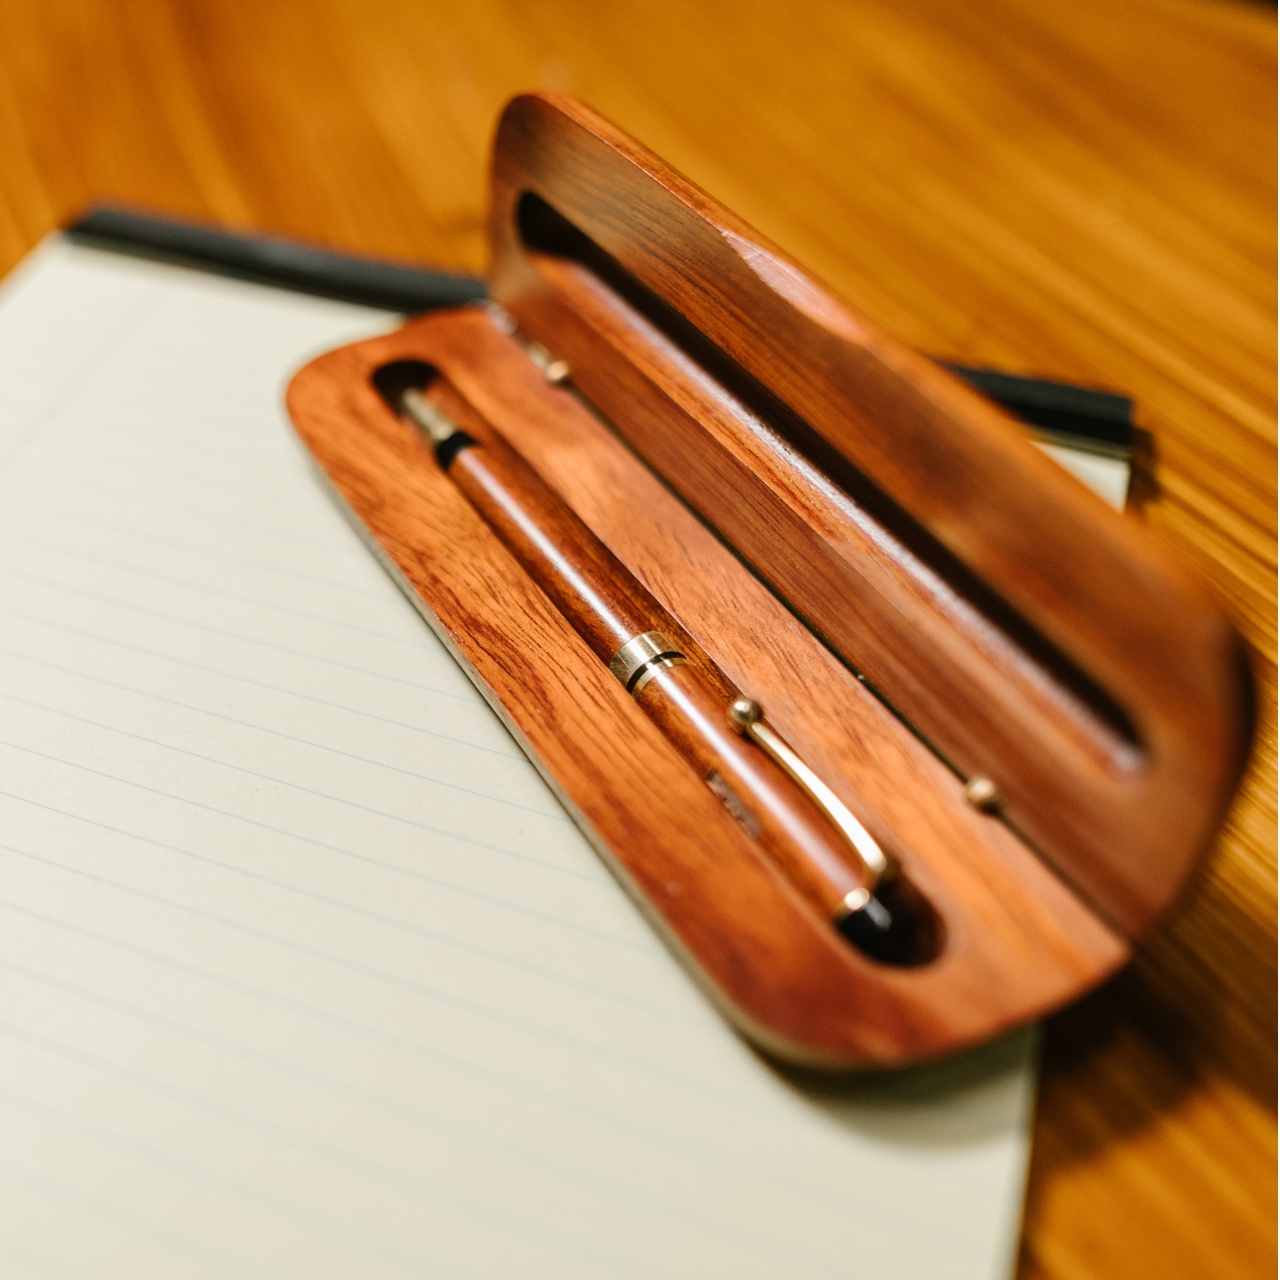 Pen and case on notebook